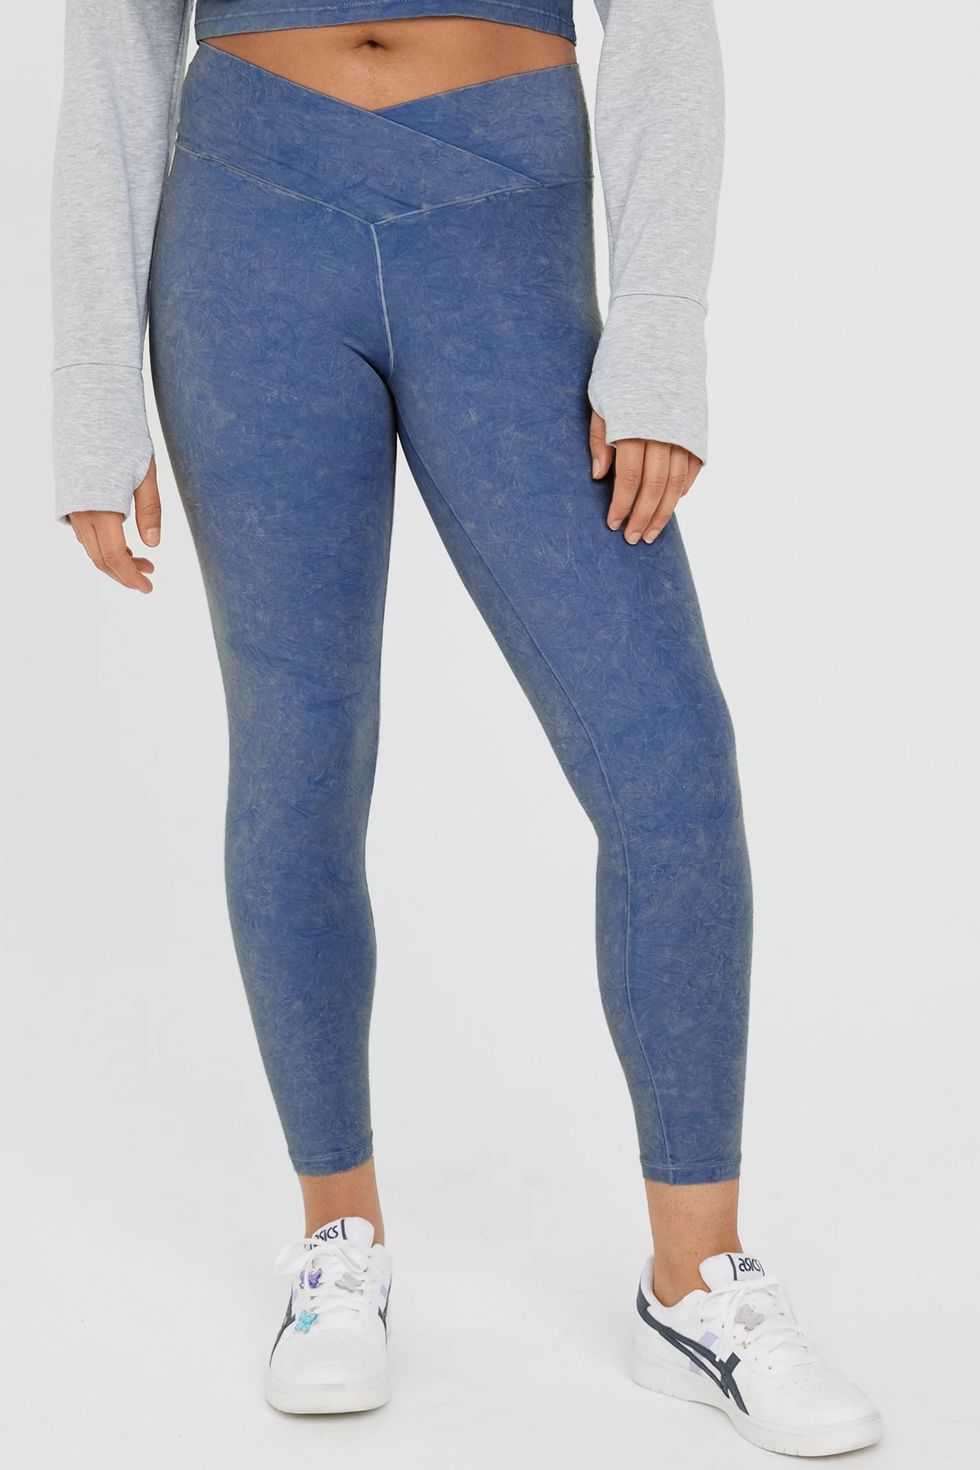 Aerie Real Me Double Crossover Flare Legging, Women's Fashion